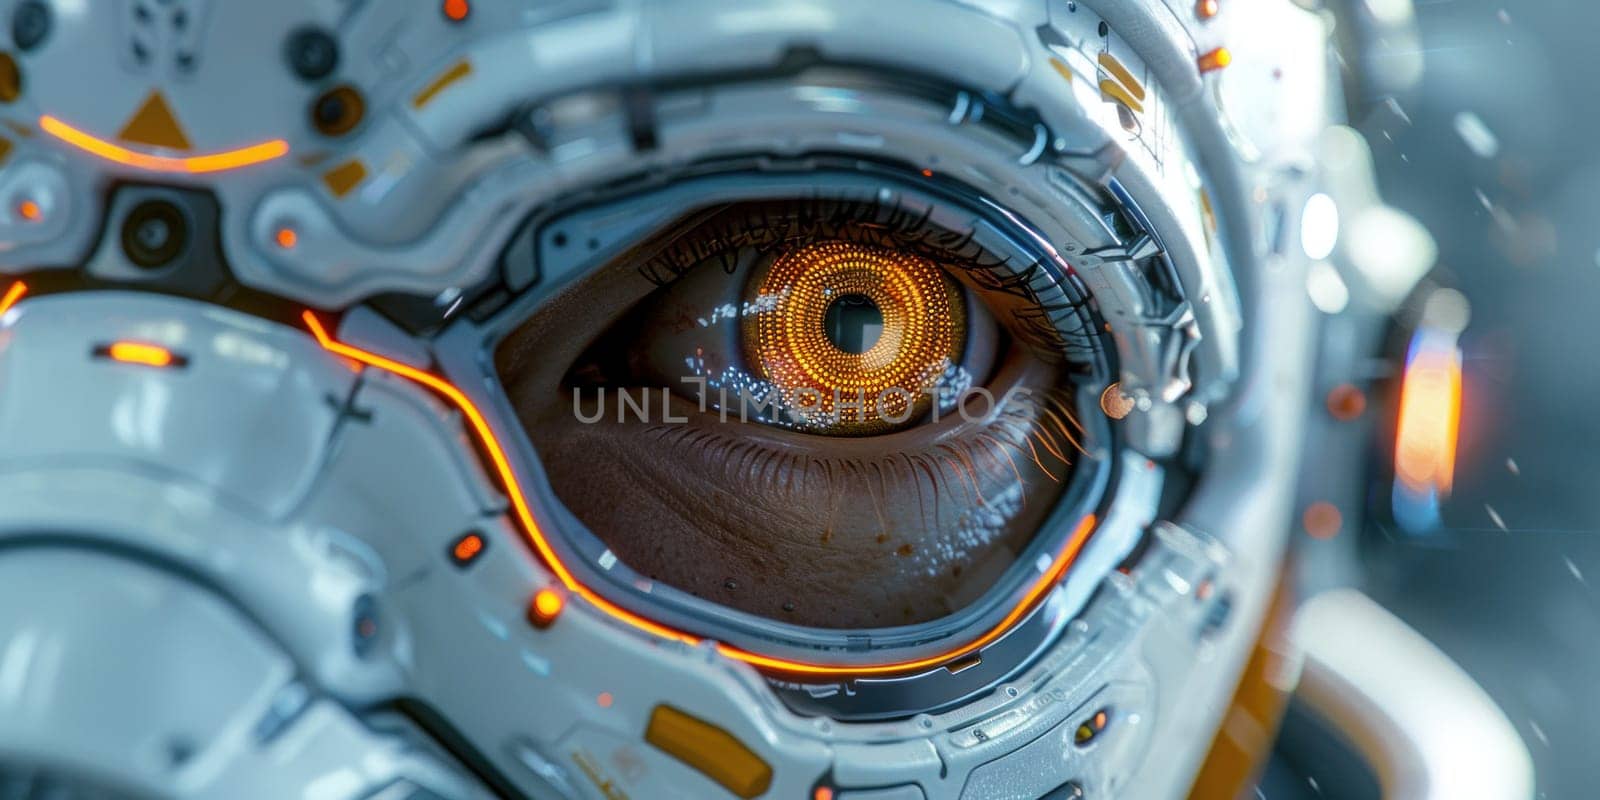 Futuristic Suit Close-Up: Human Eye by but_photo